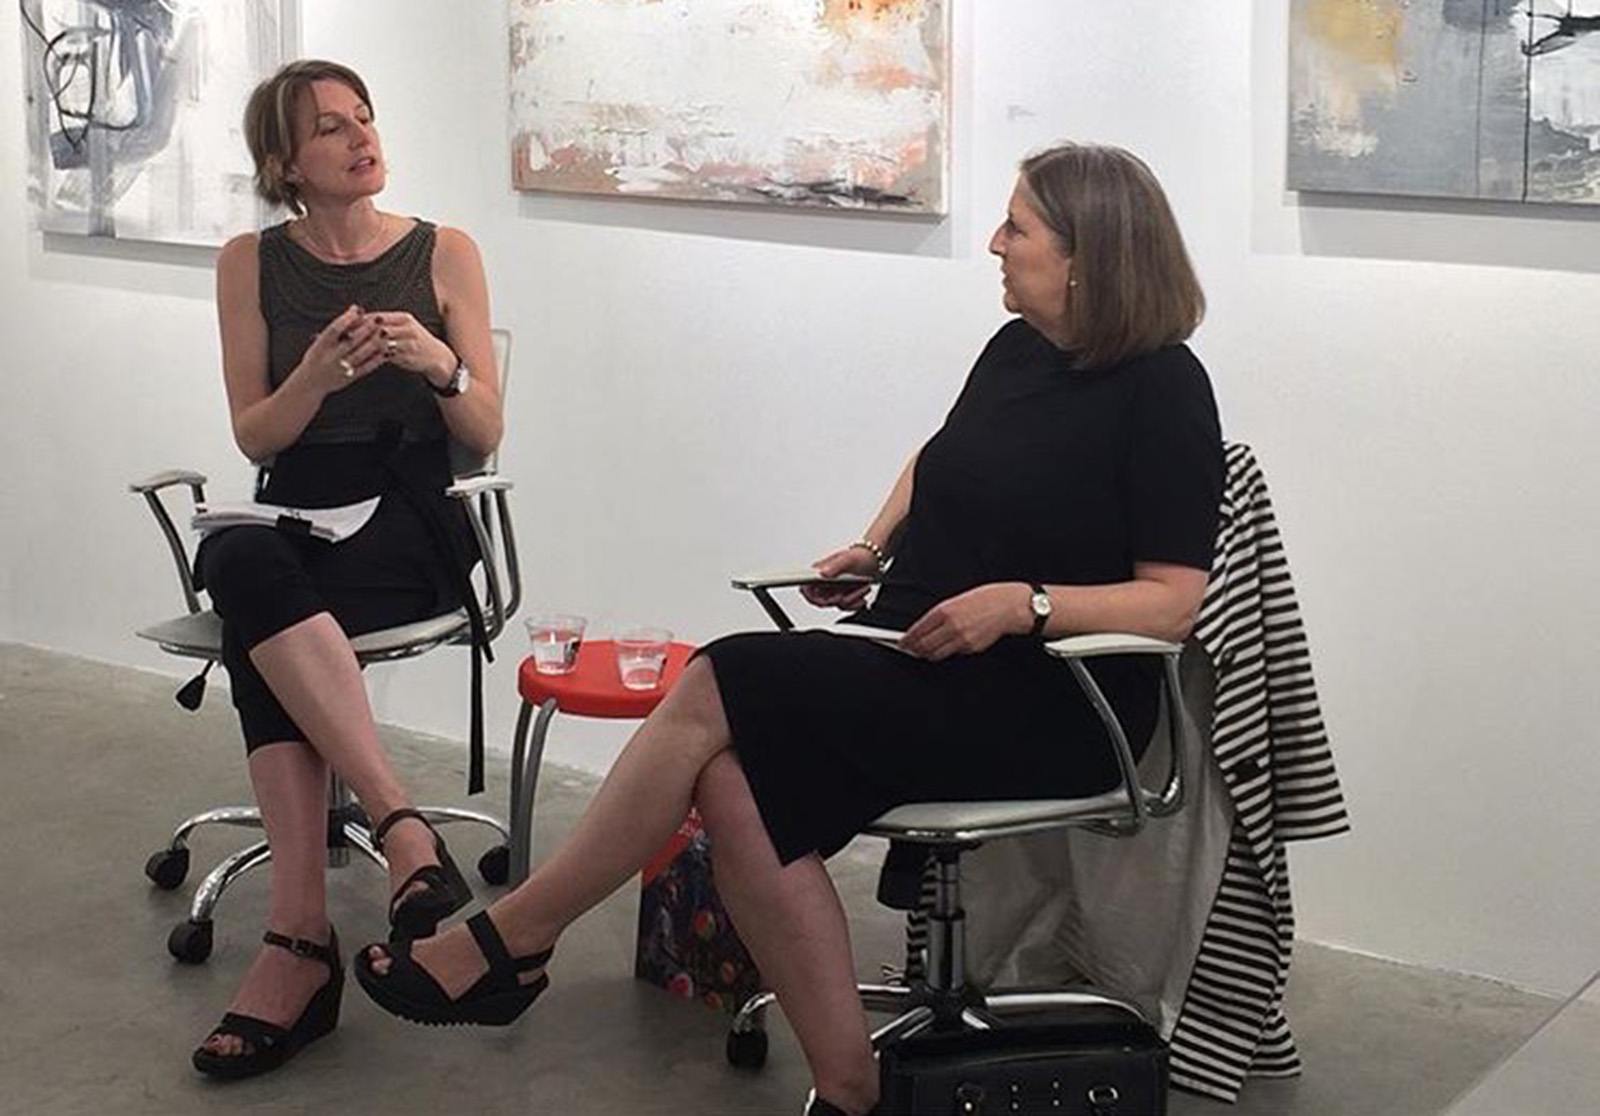 Image for jen mergel (left), the senior curator of contemporary art at the museum of fine arts, boston, moderated a question and answer session with julie burros 